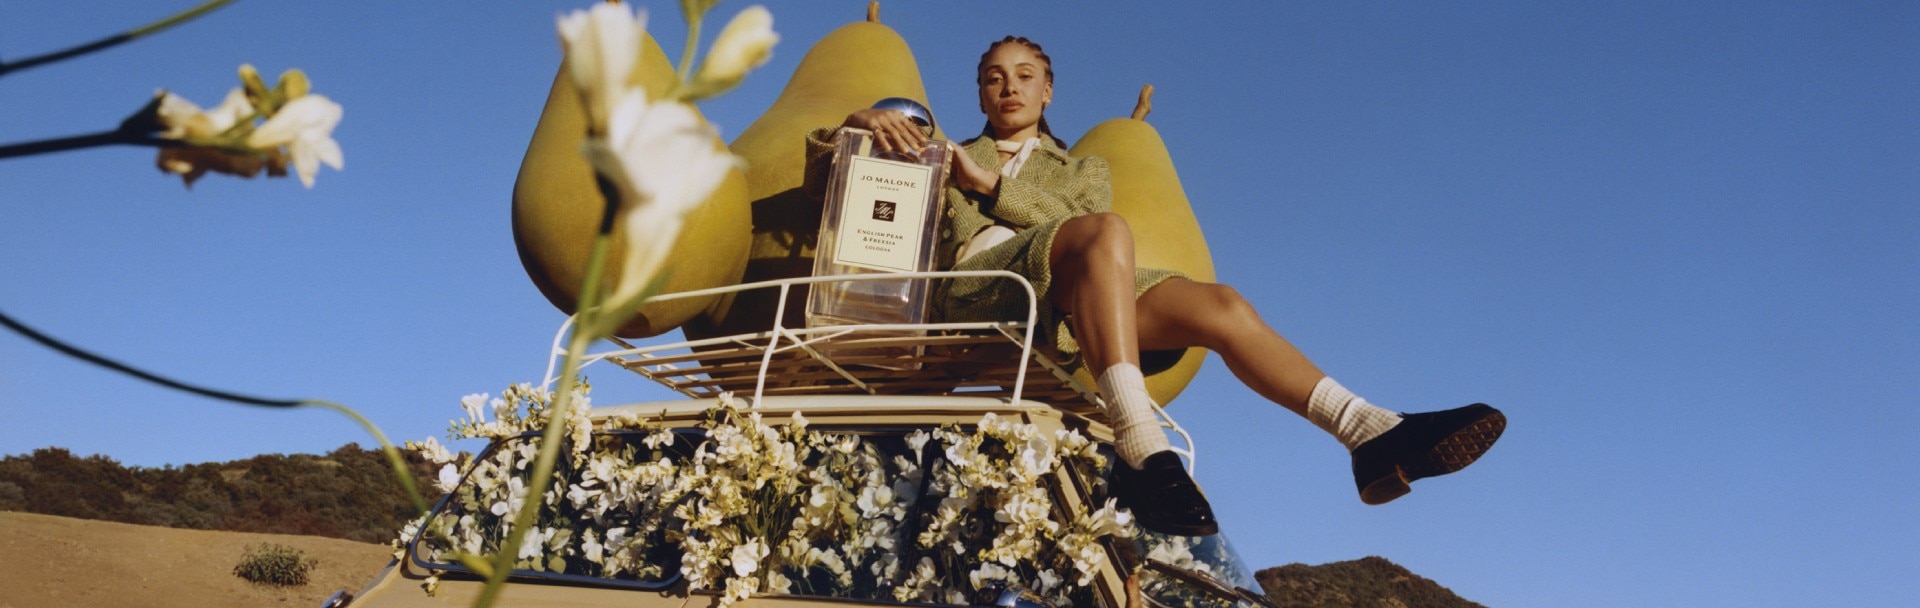 Global Ambassador for Jo Malone London, Adwoa Aboah stands on a ladder with a hot air balloon behind them